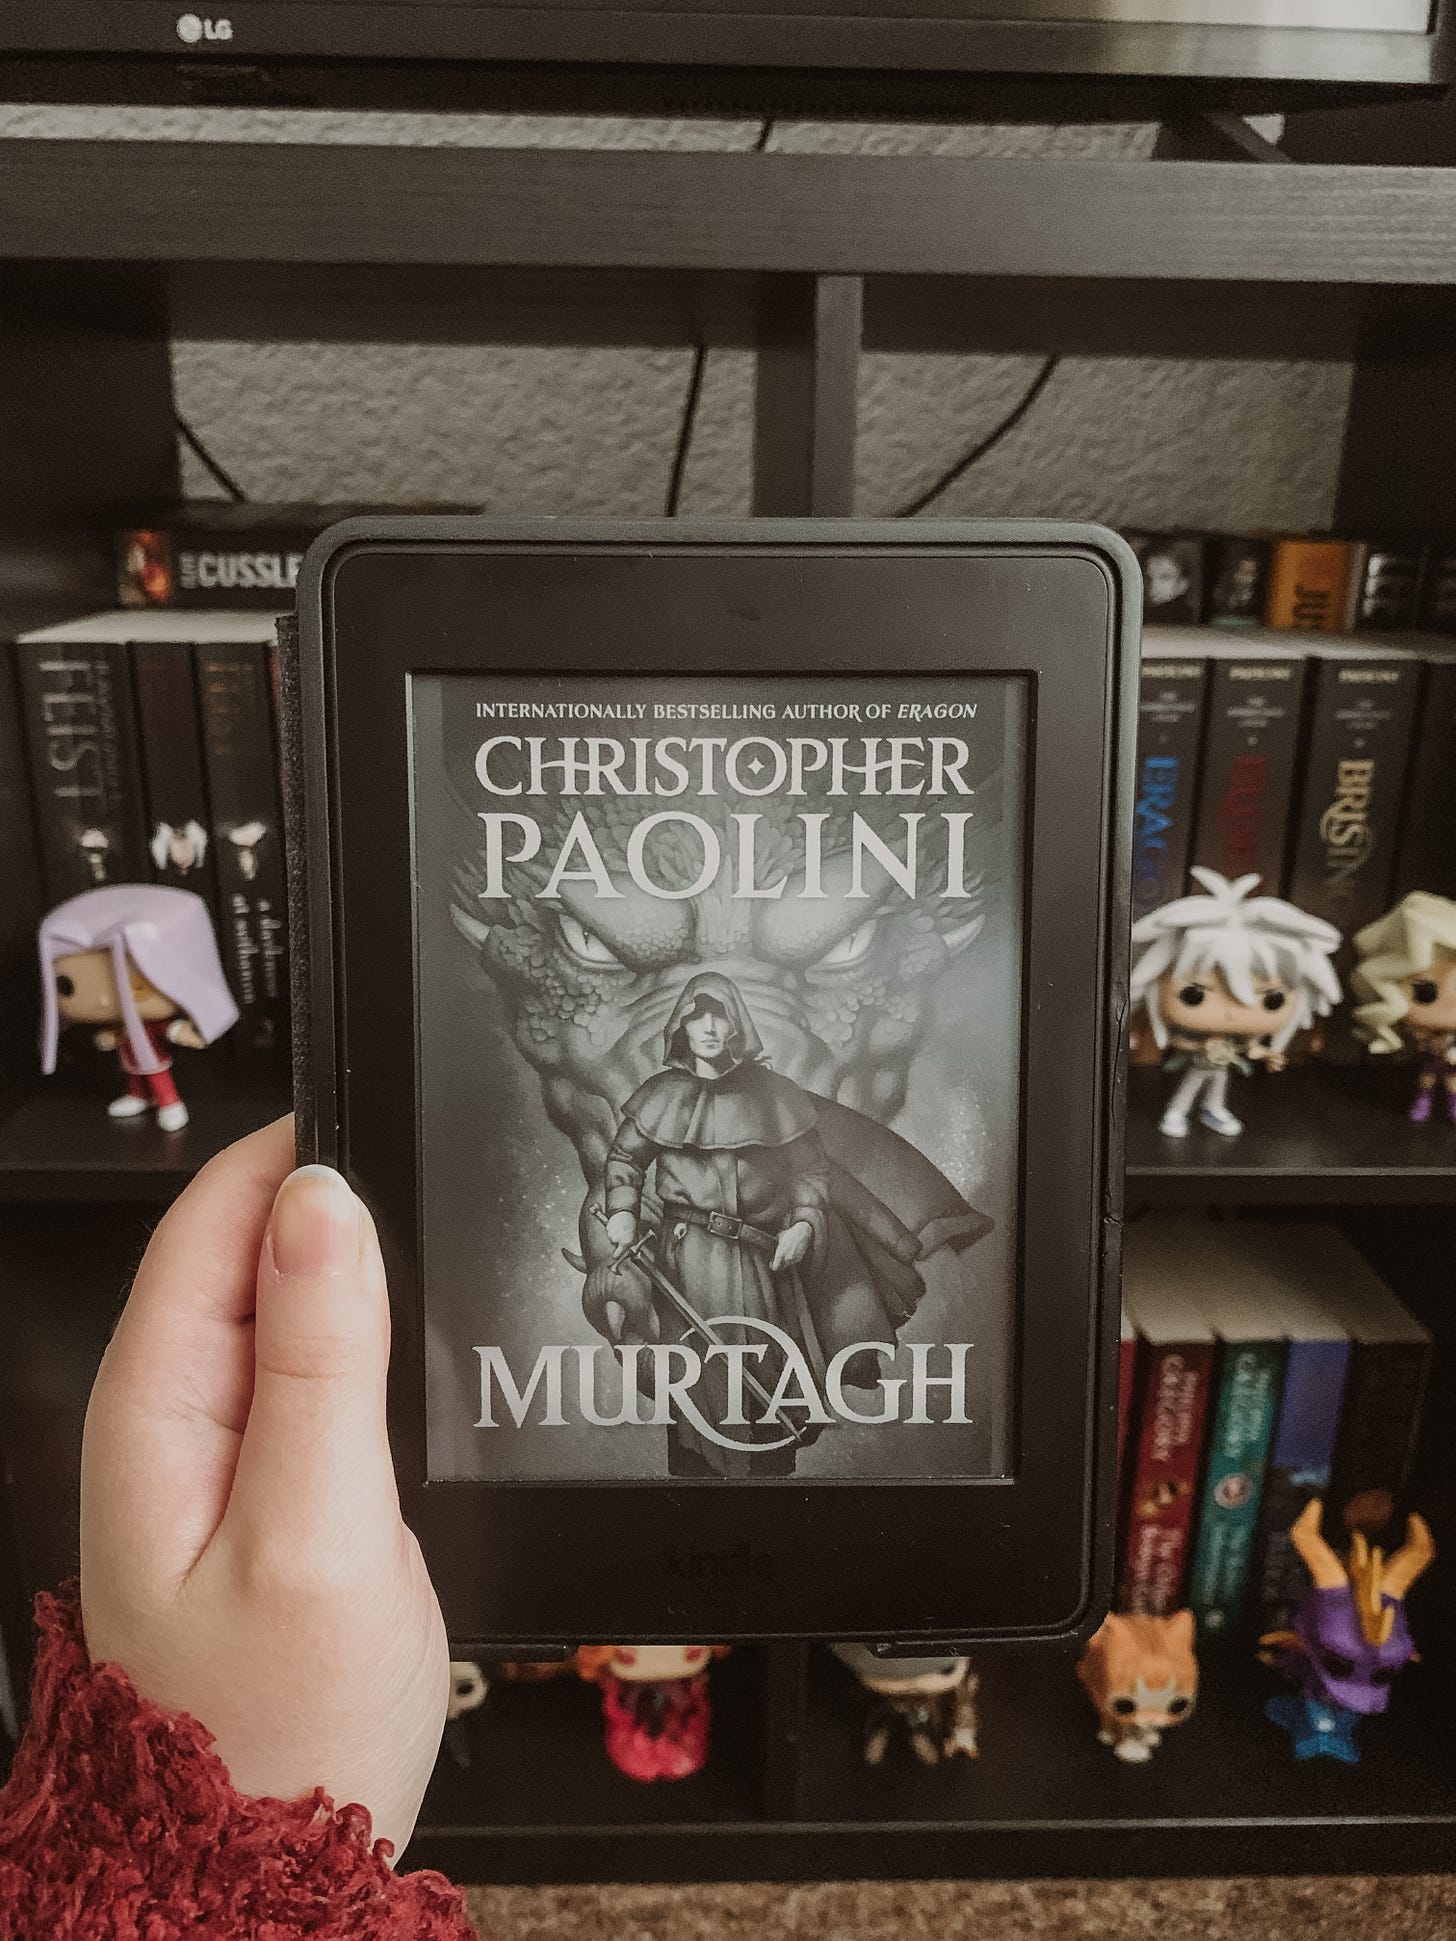 A black kindle being held up in front of a bookcase, with the fron cover of Murtagh by Christopher Paolini on the screen